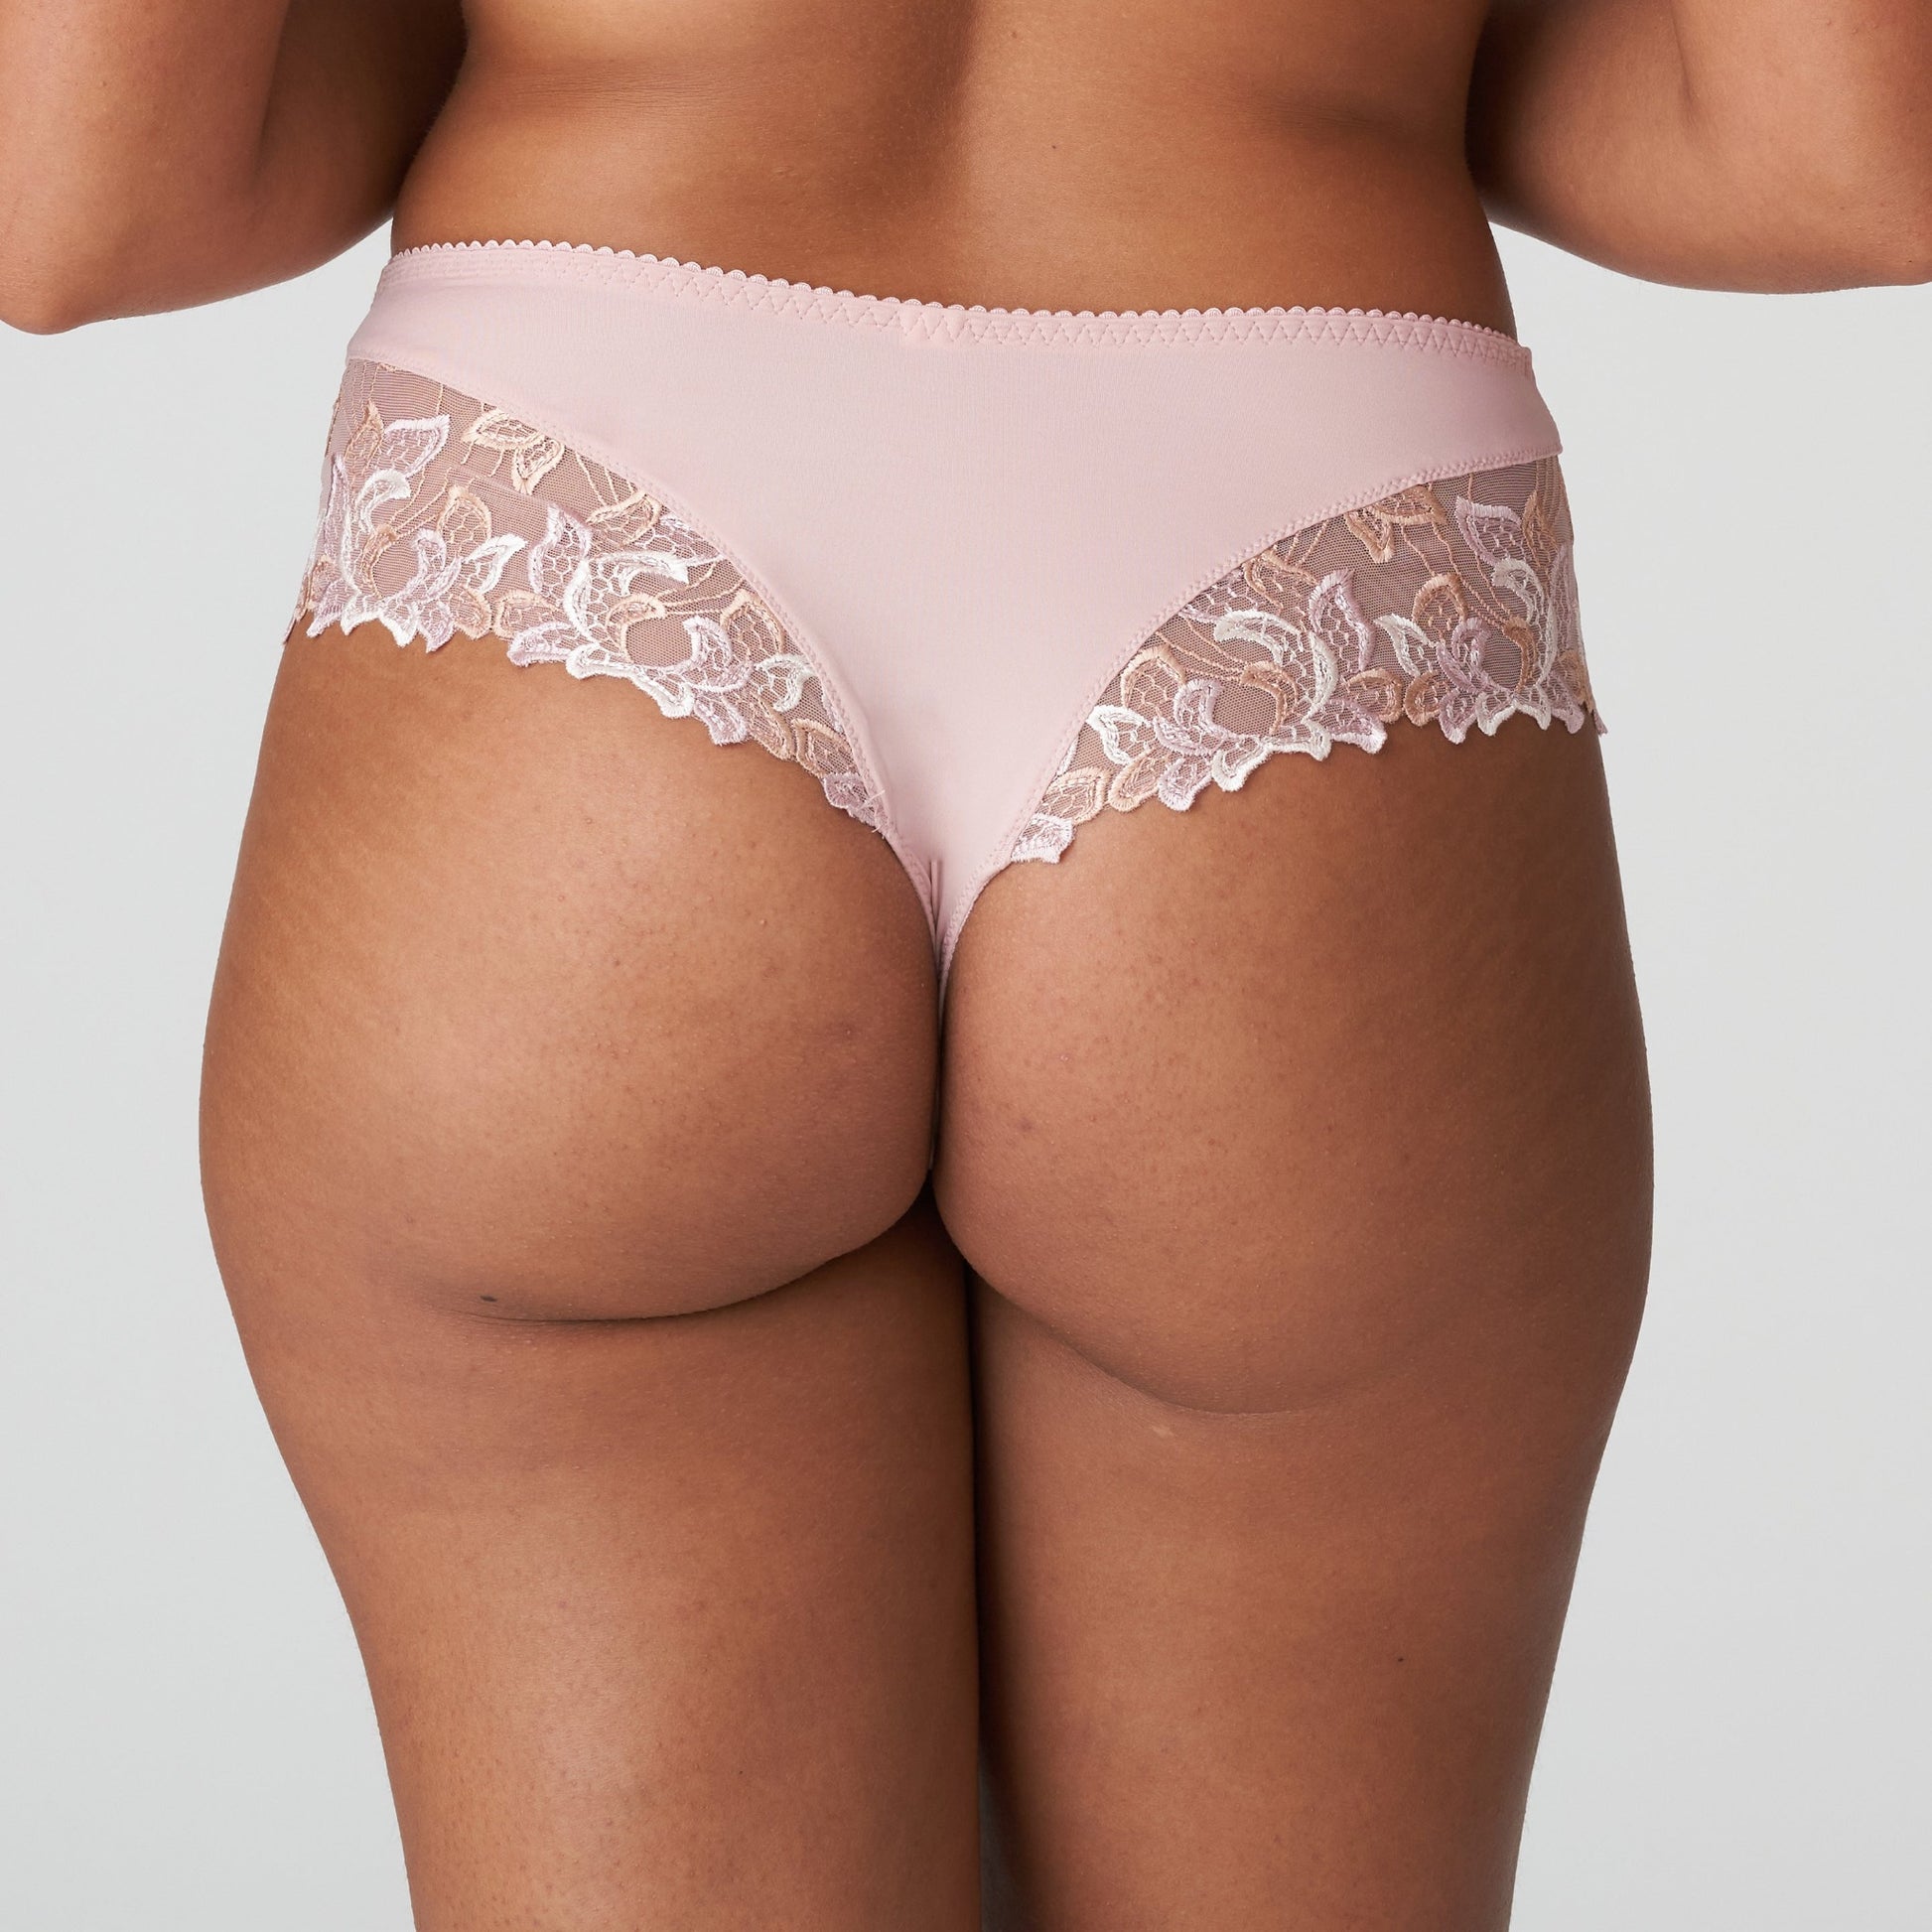 Back view of a woman wearing the Deauville Luxury Thong with elegant lace in Vintage Pink by Primadonna.